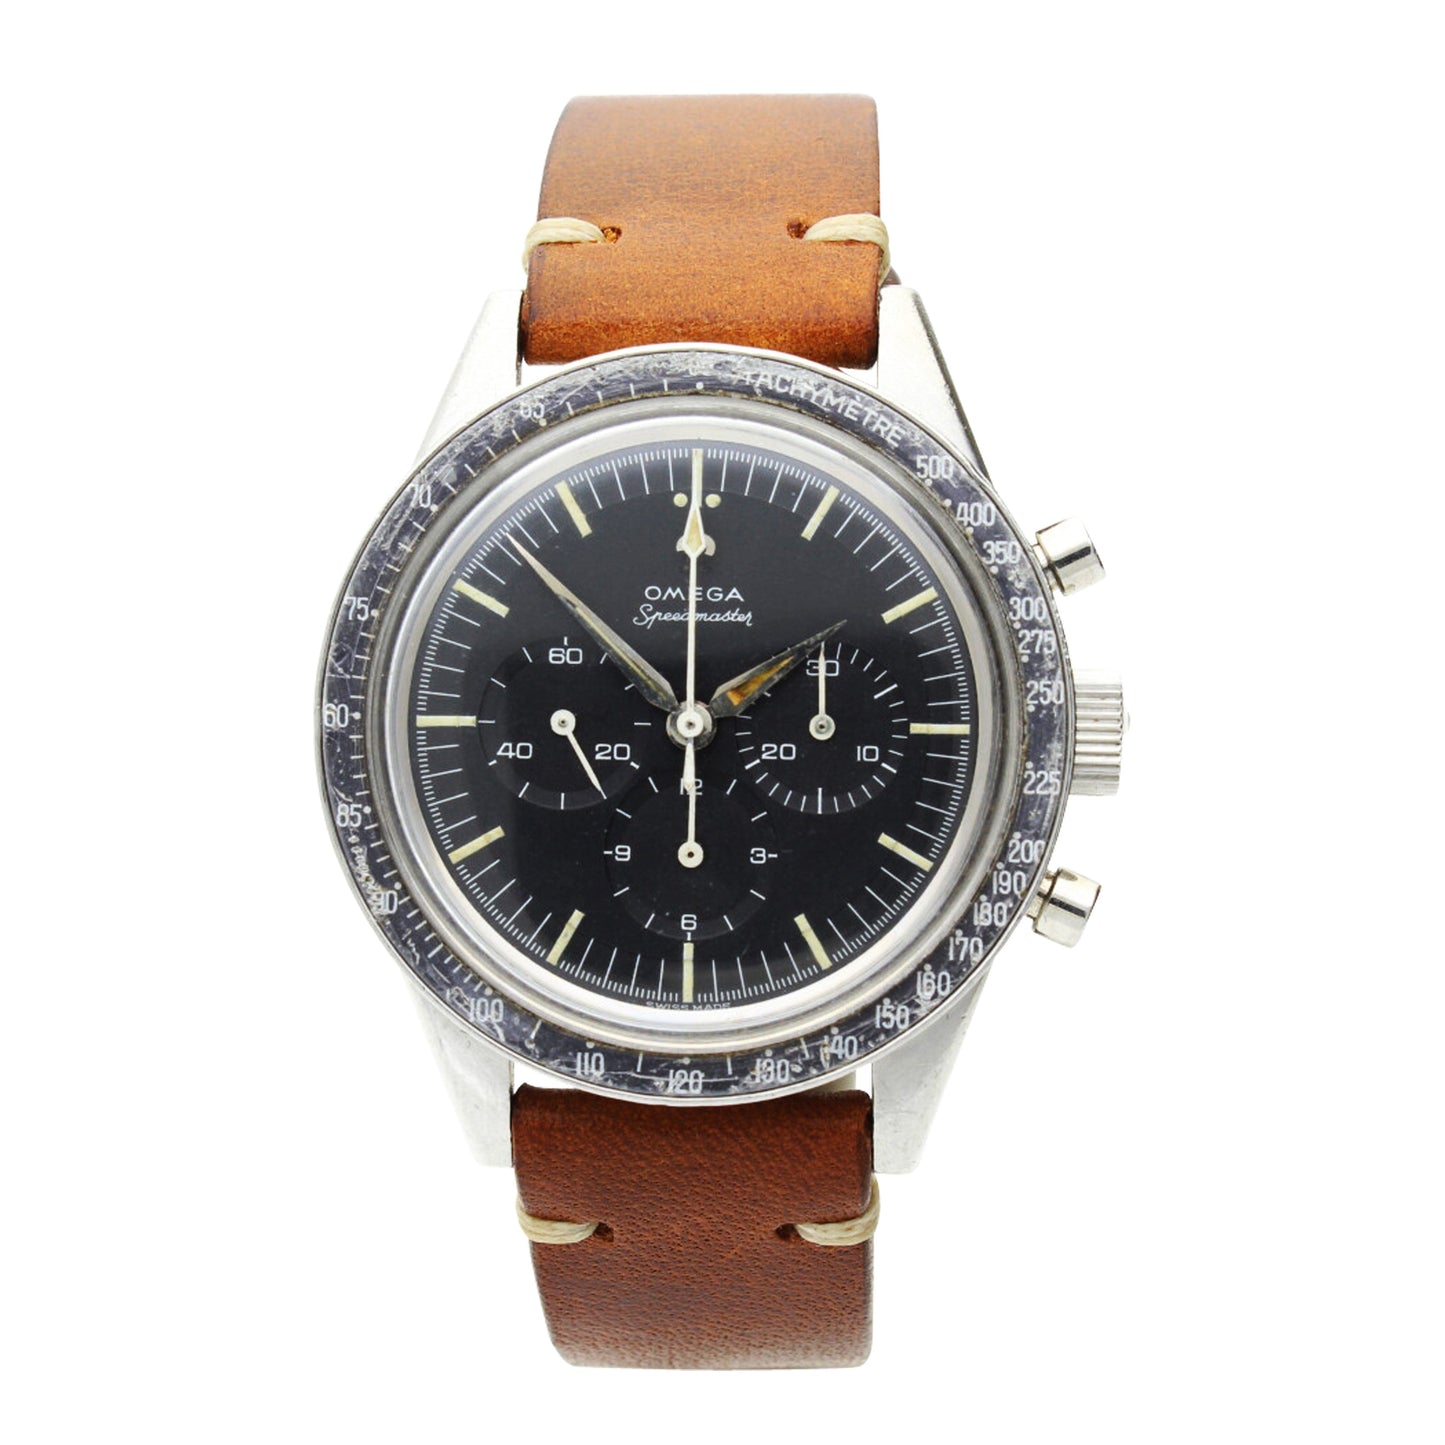 Stainless steel Speedmaster, reference 2998-62 chronograph wristwatch. Made 1962